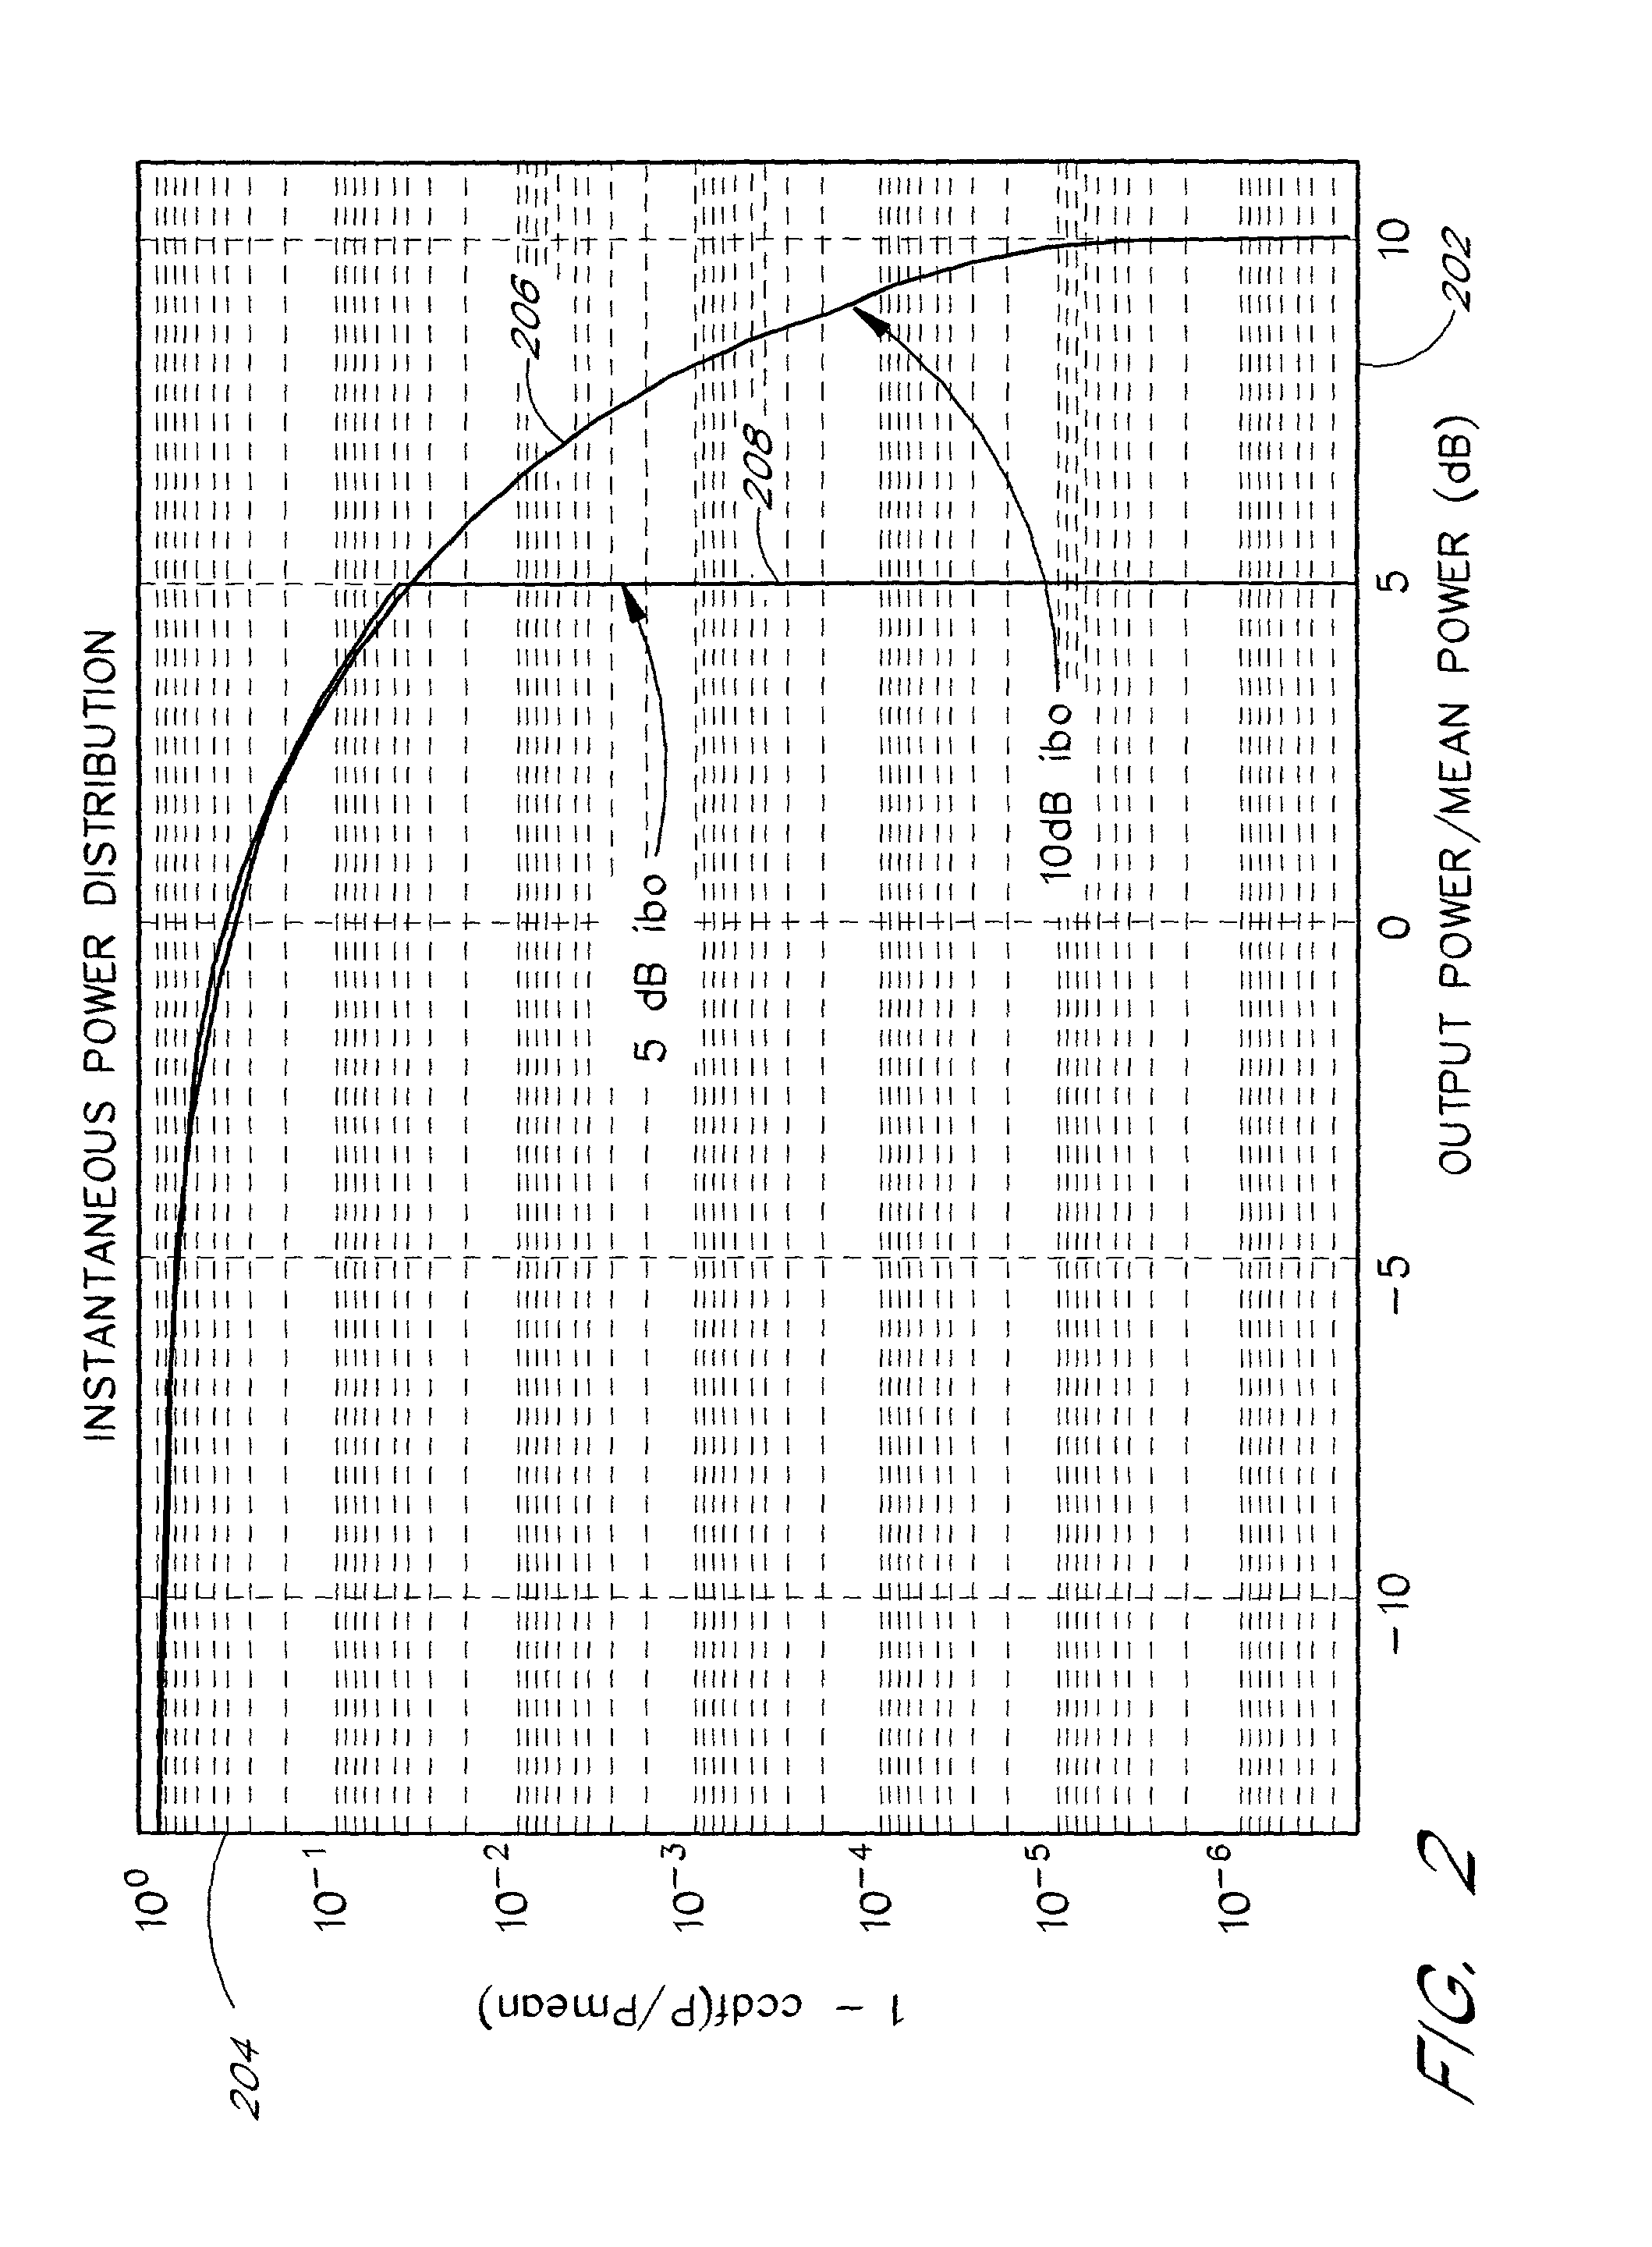 Systems and methods for the dynamic range compression of multi-bearer single-carrier and multi-carrier waveforms